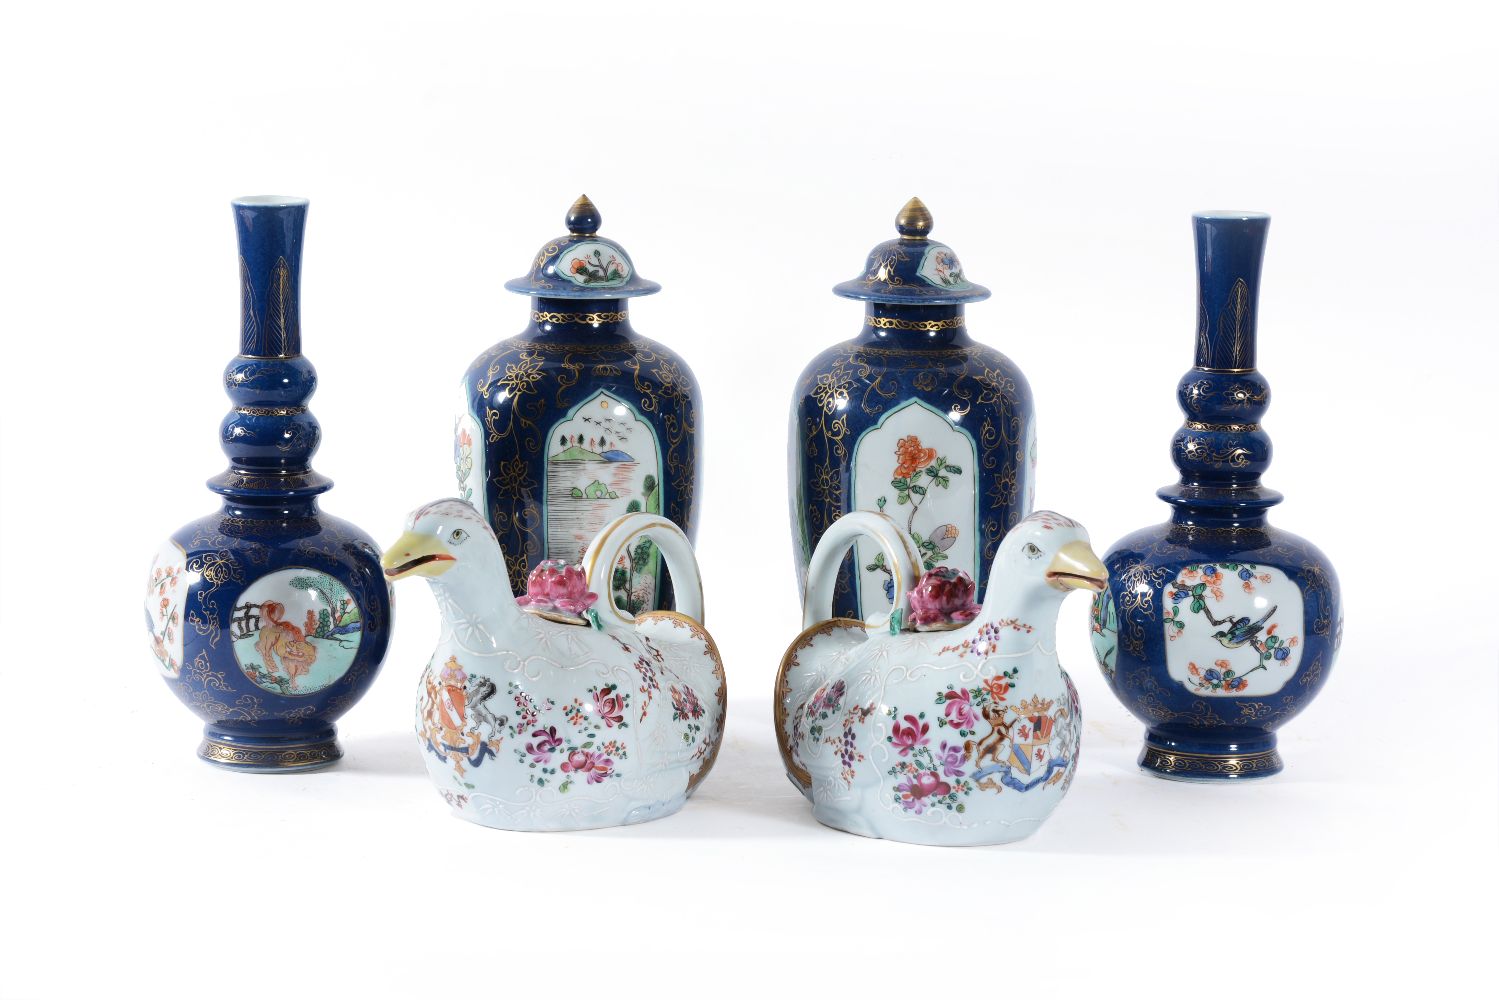 A group of porcelains, probably Edme Samson, late 19th century